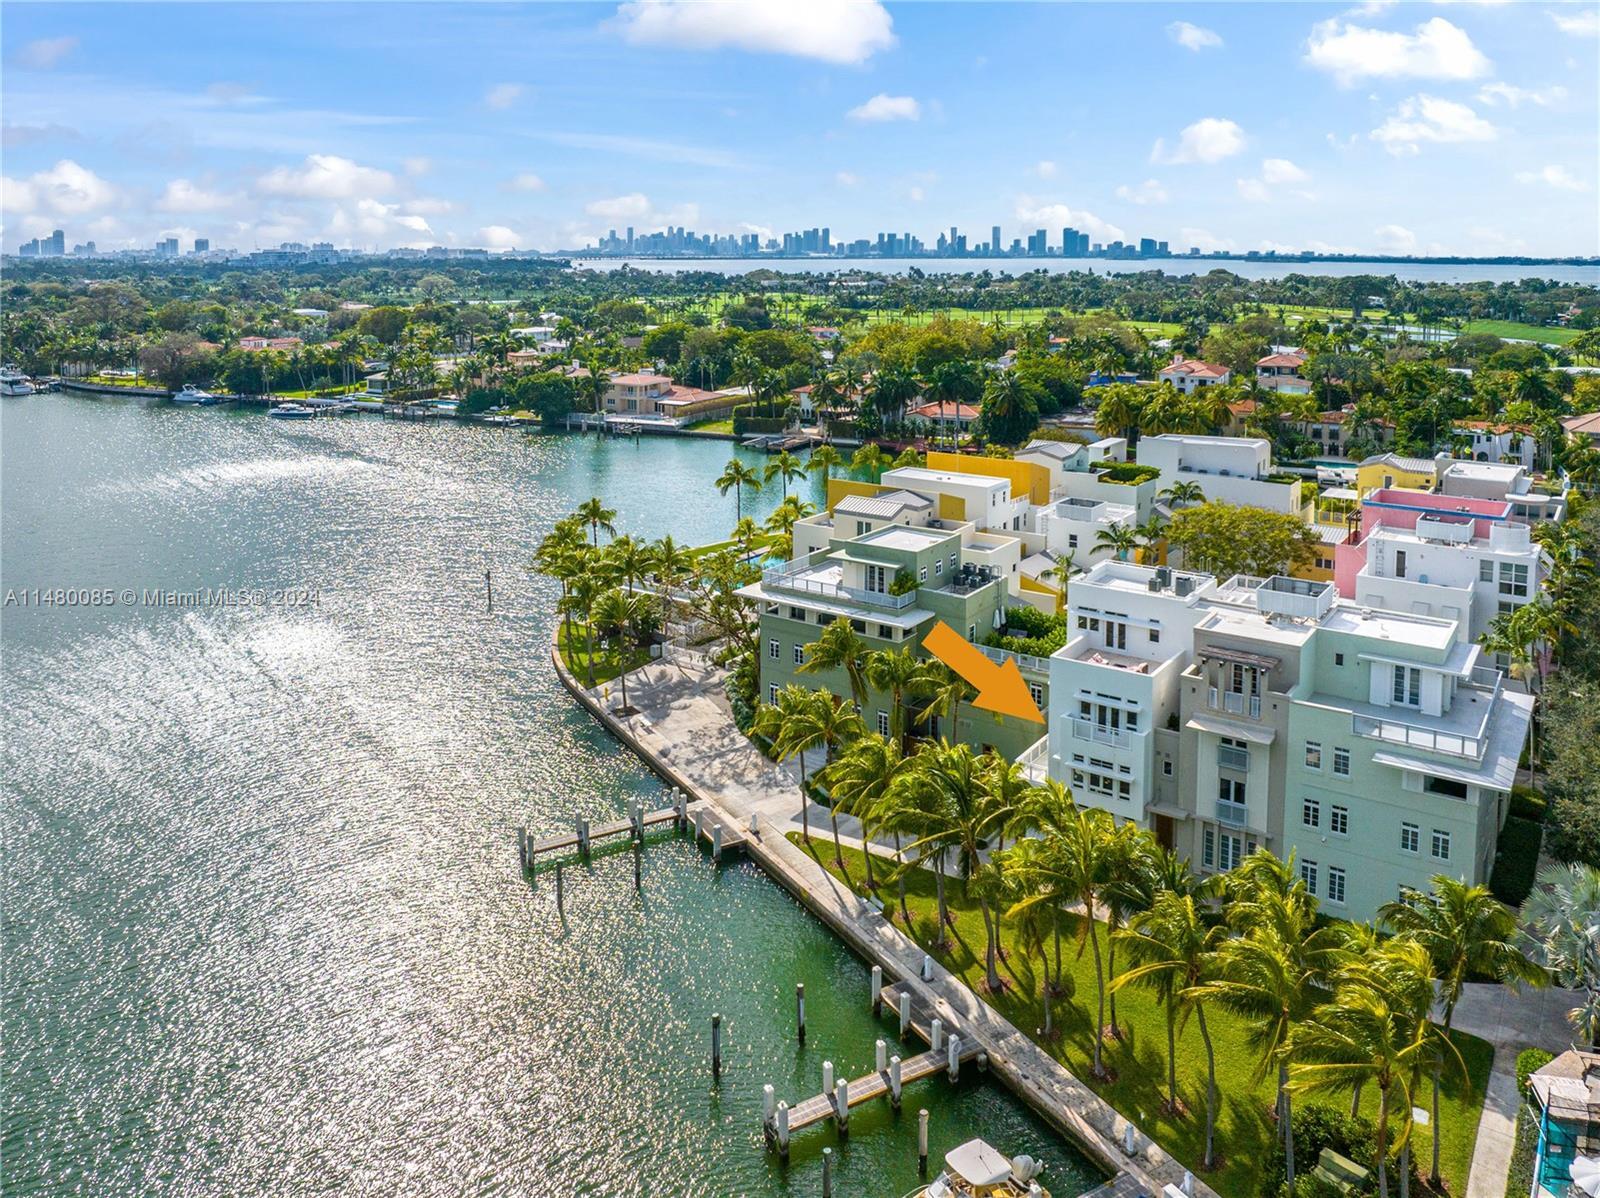 Premier Island Living on Private Aqua Island! This exceptional corner townhouse is nestled right on 